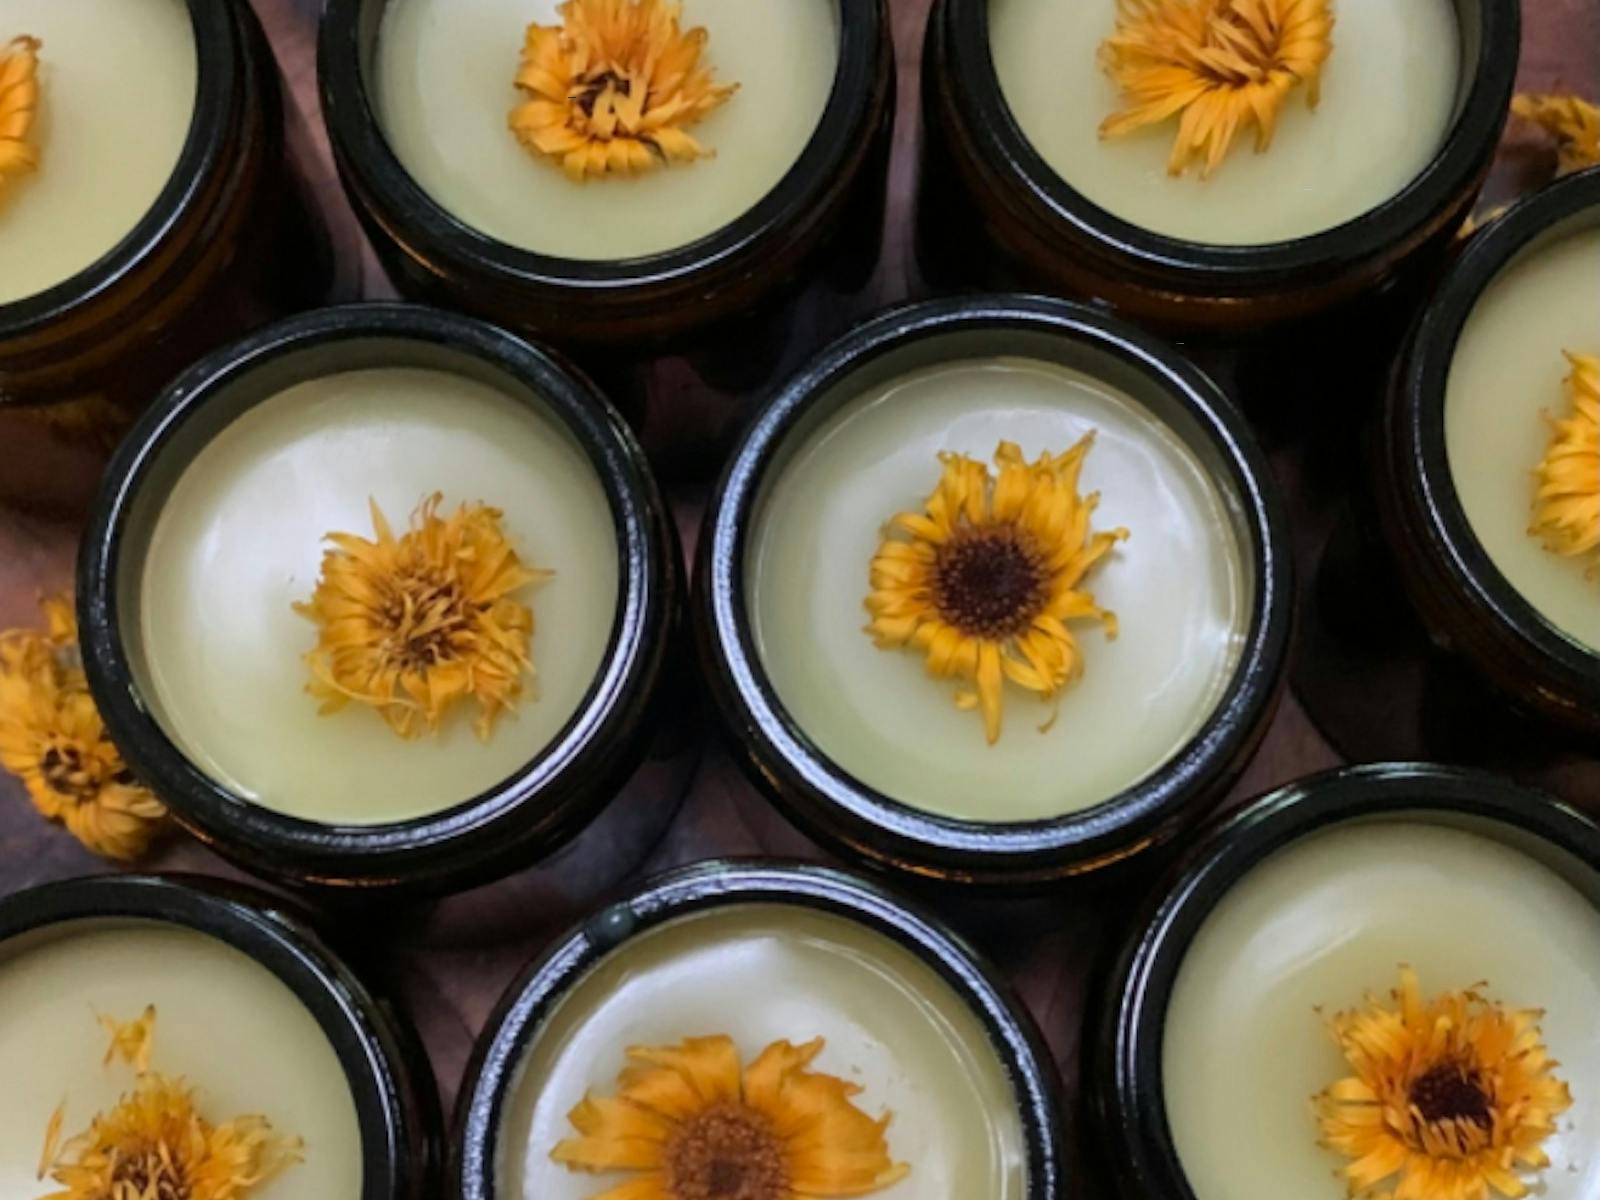 Amber jars filled with calendula salve and dried flowers on top